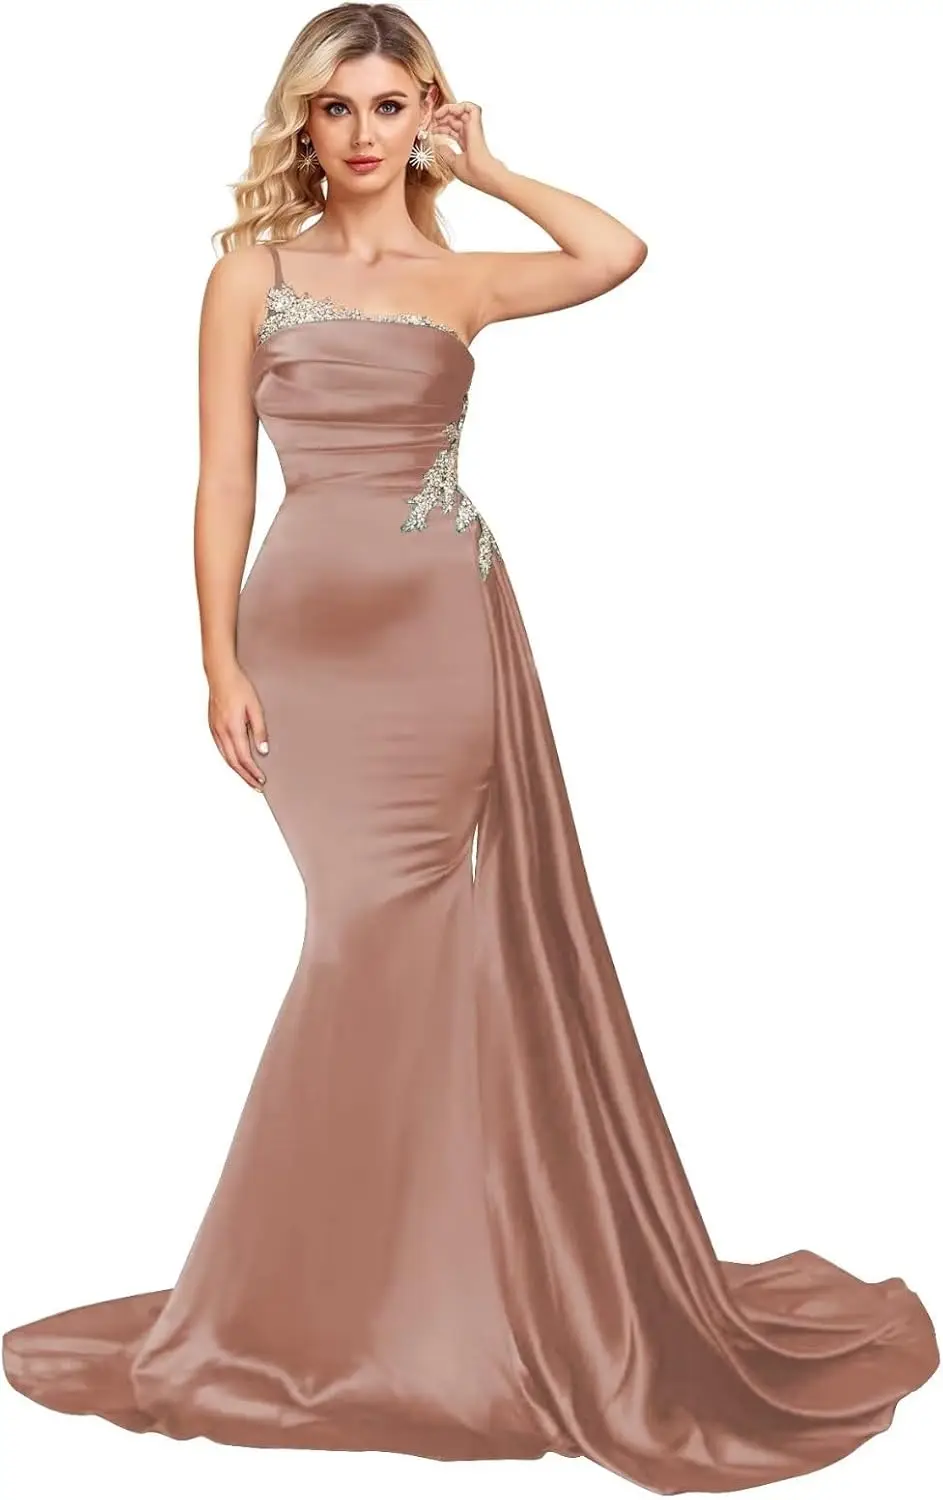 

One Shoulder Mermaid Bridesmaid Dresses for Wedding, Applique Prom Dress, Spaghetti Straps, Formal Evening Gowns